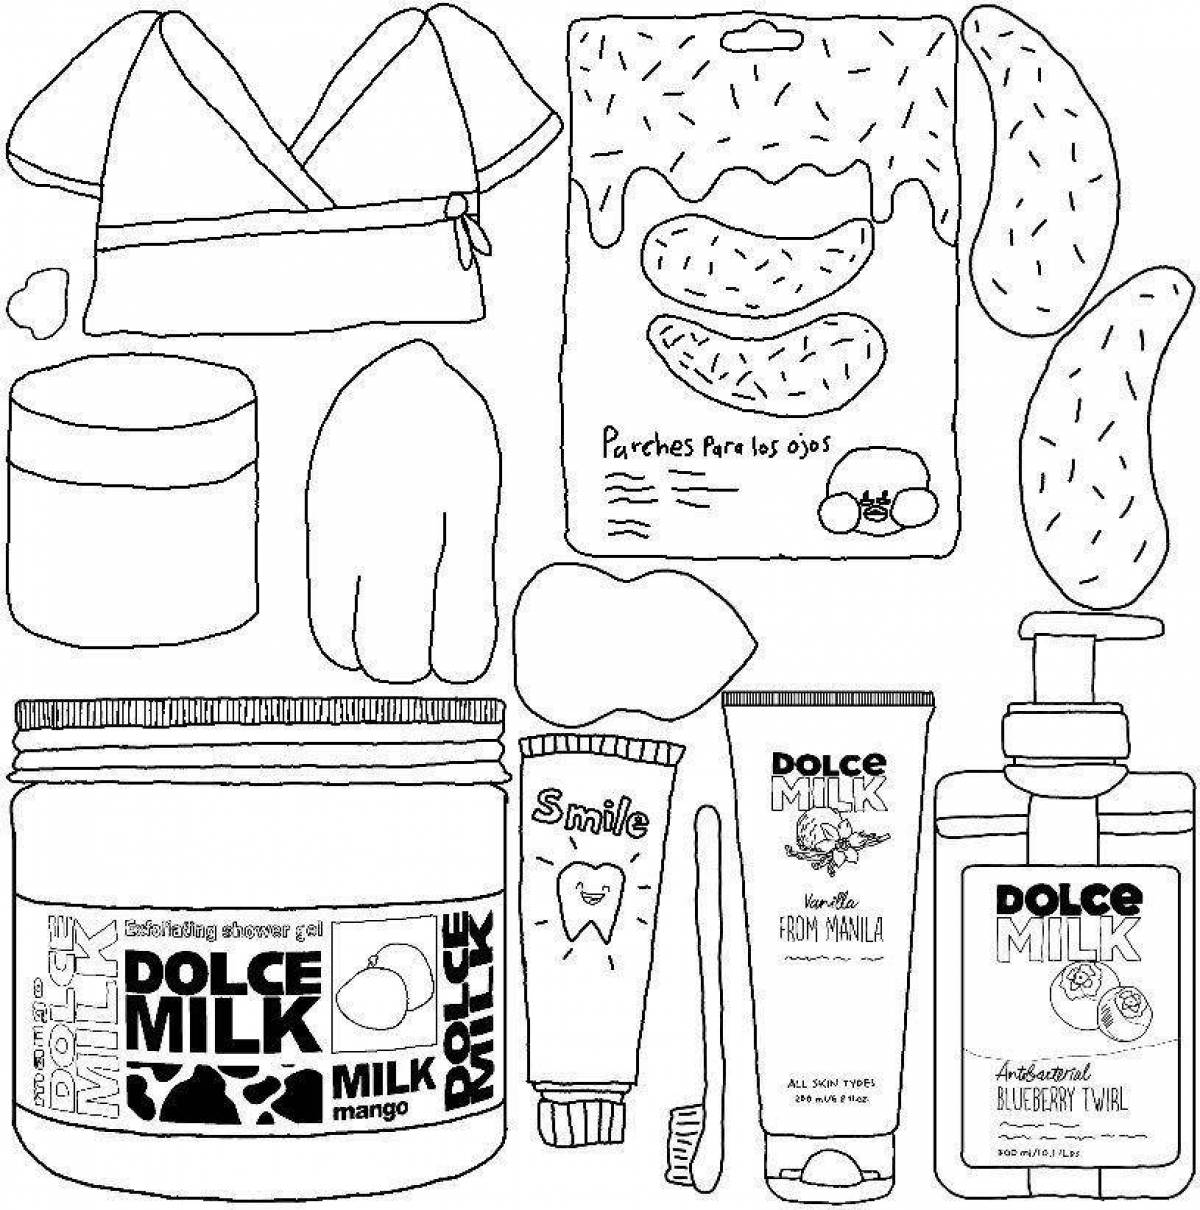 Daughter's sparkling milk coloring page